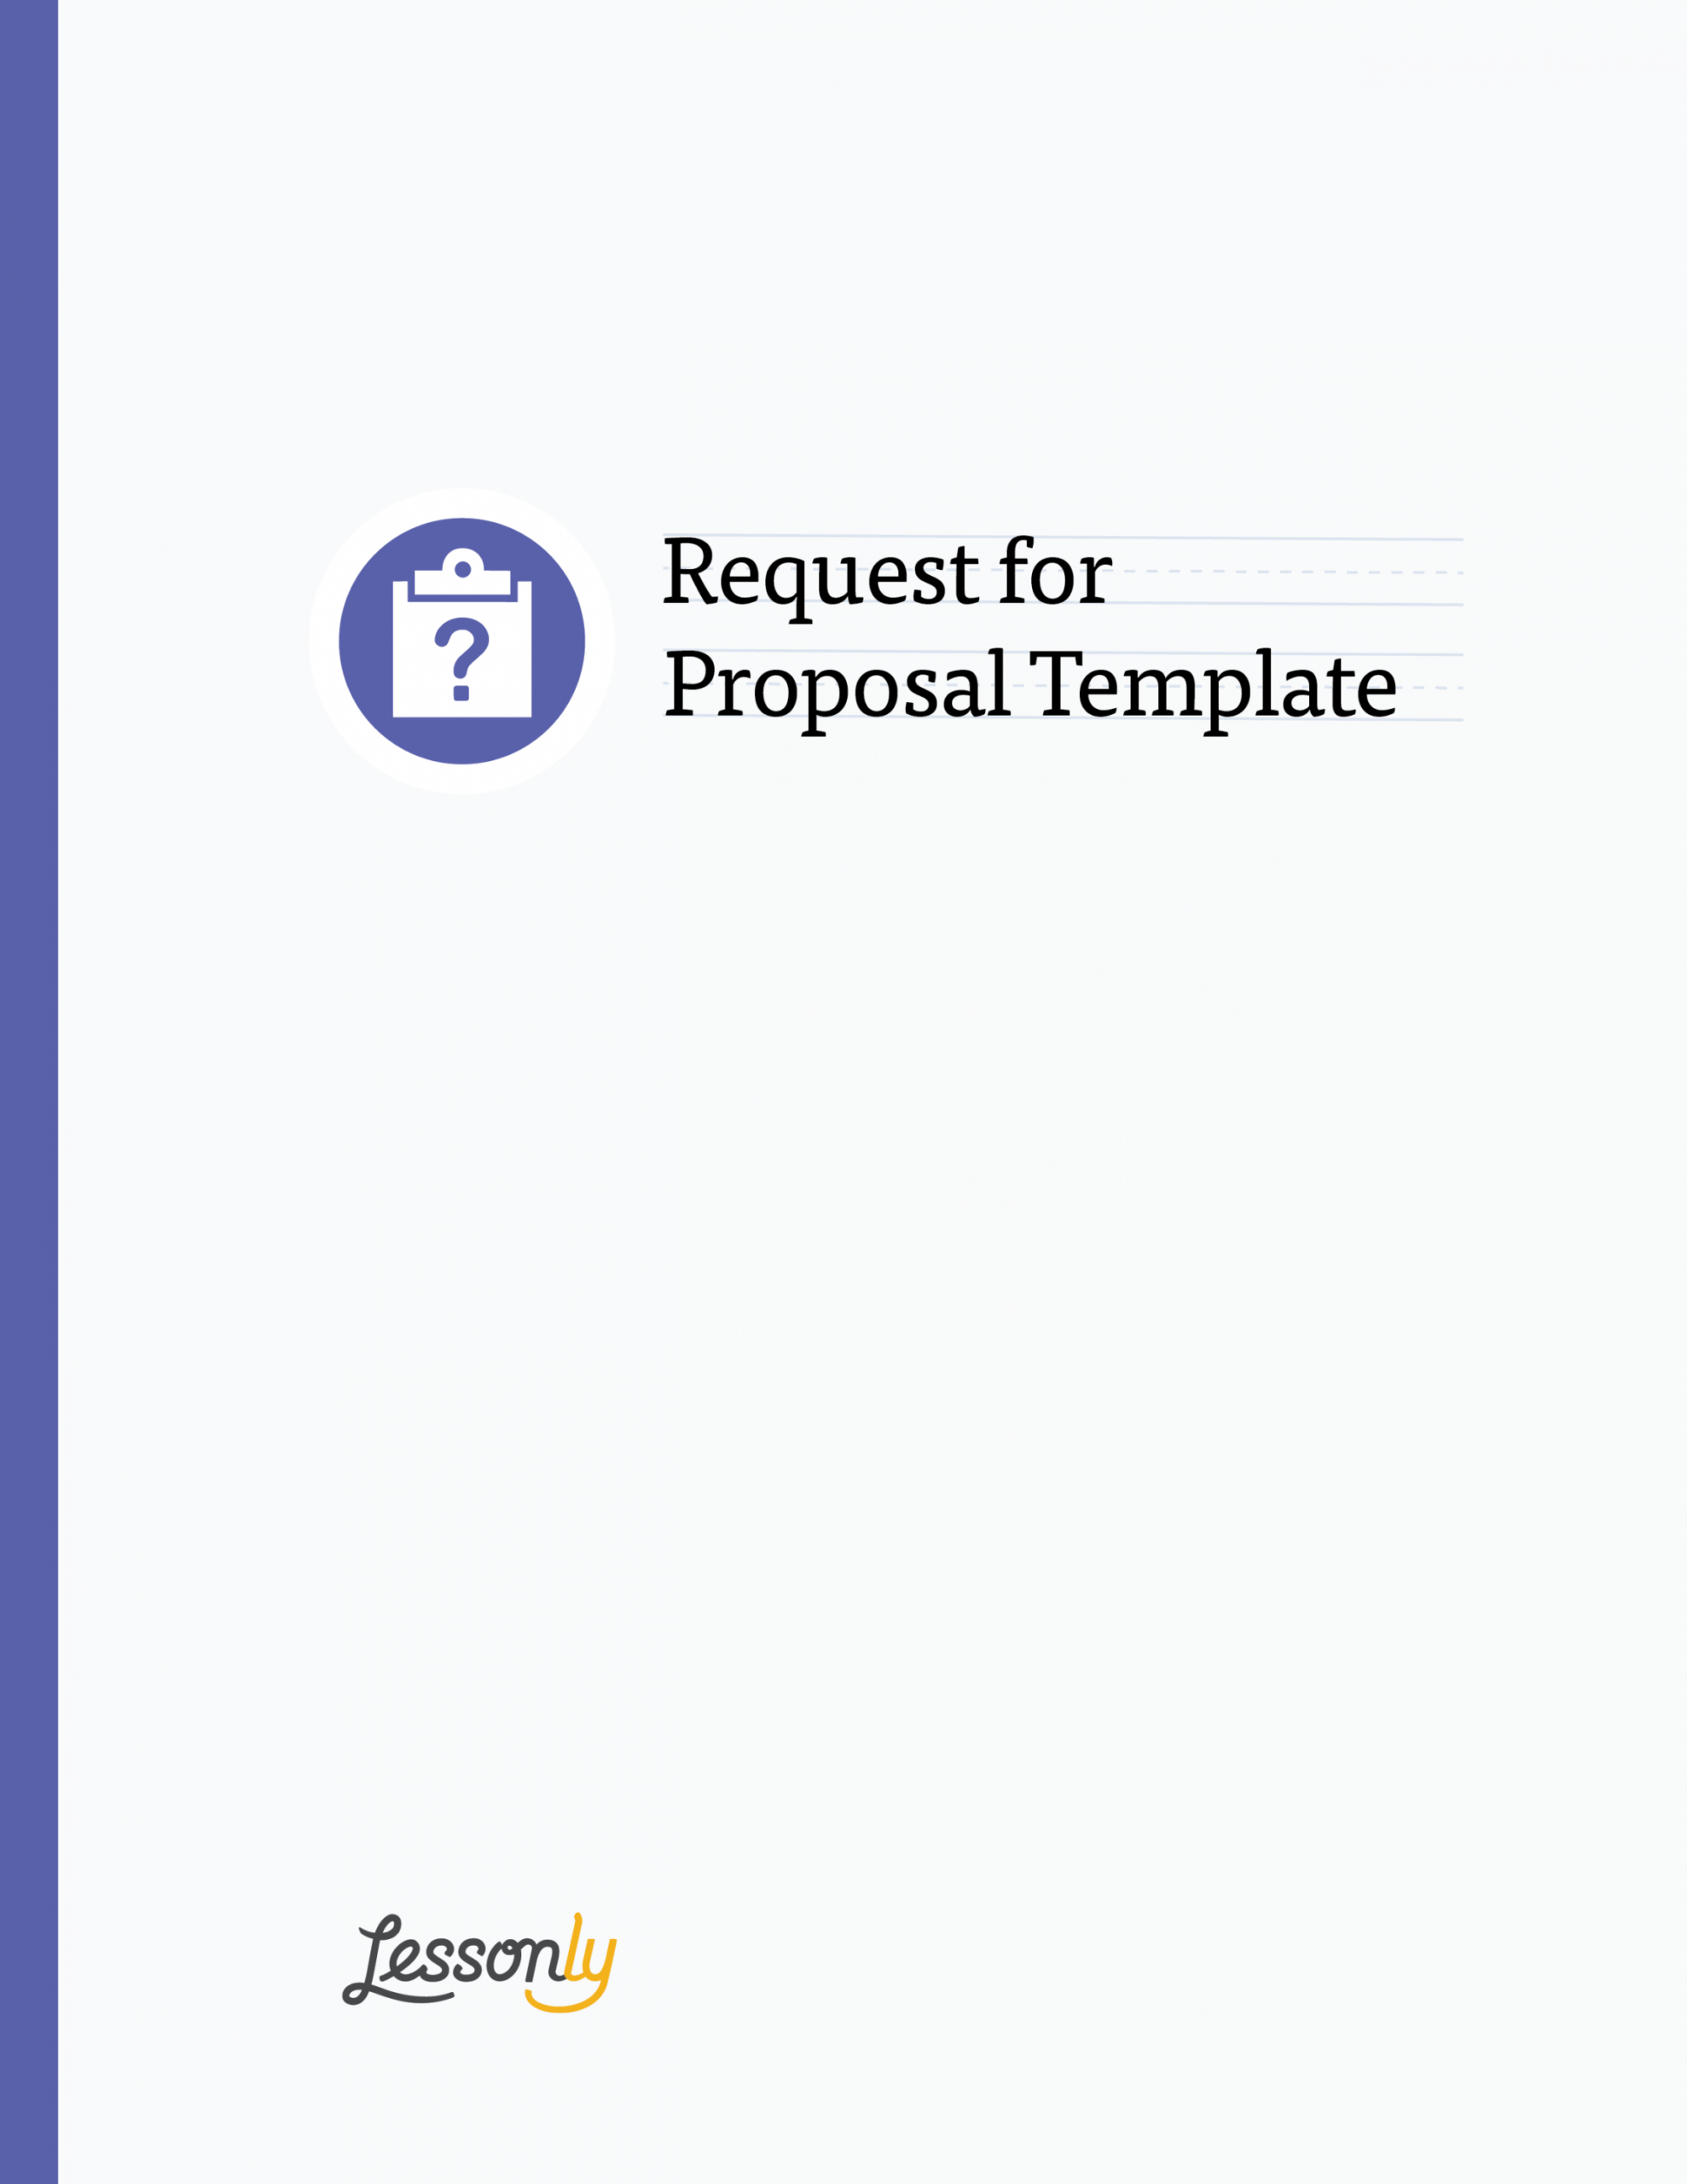 printable free lms request for proposal template  lessonly software training proposal template pdf